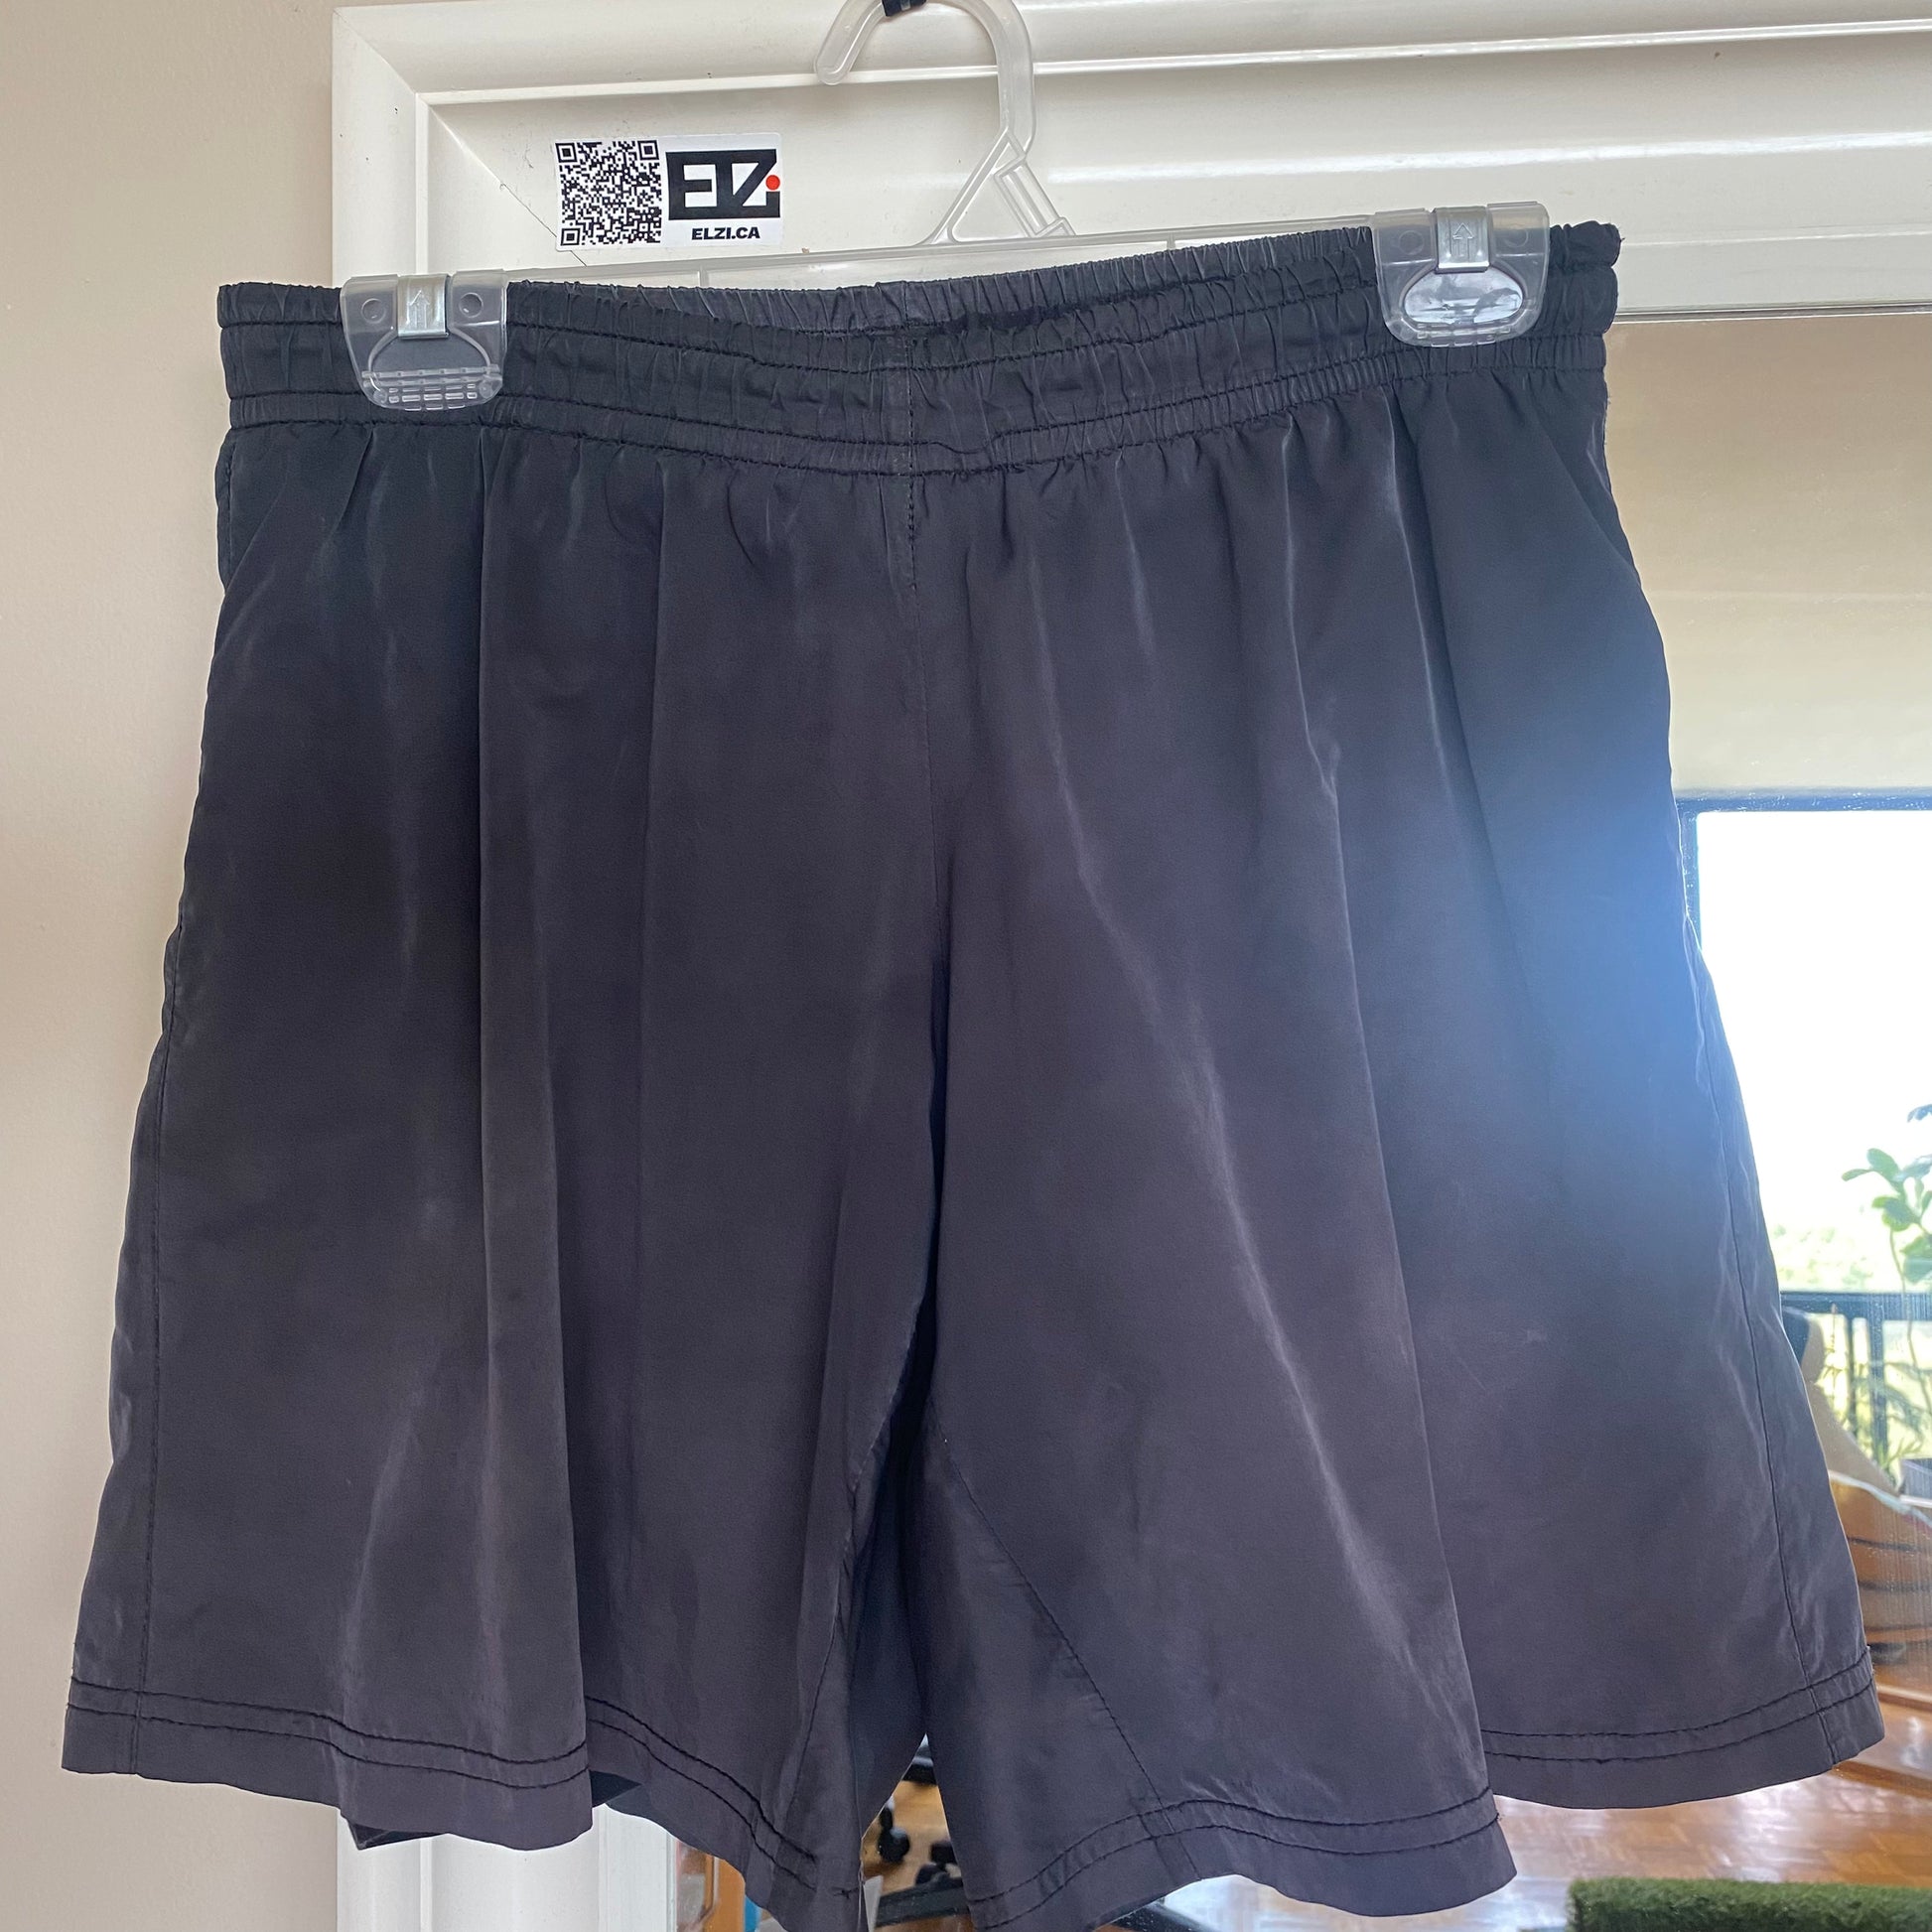 bamboo liner shorts with protective shell from ELZI.ca. This is what the shorts looks like after 1 year of heavy use. ( Gym , whitewater kayak, run )